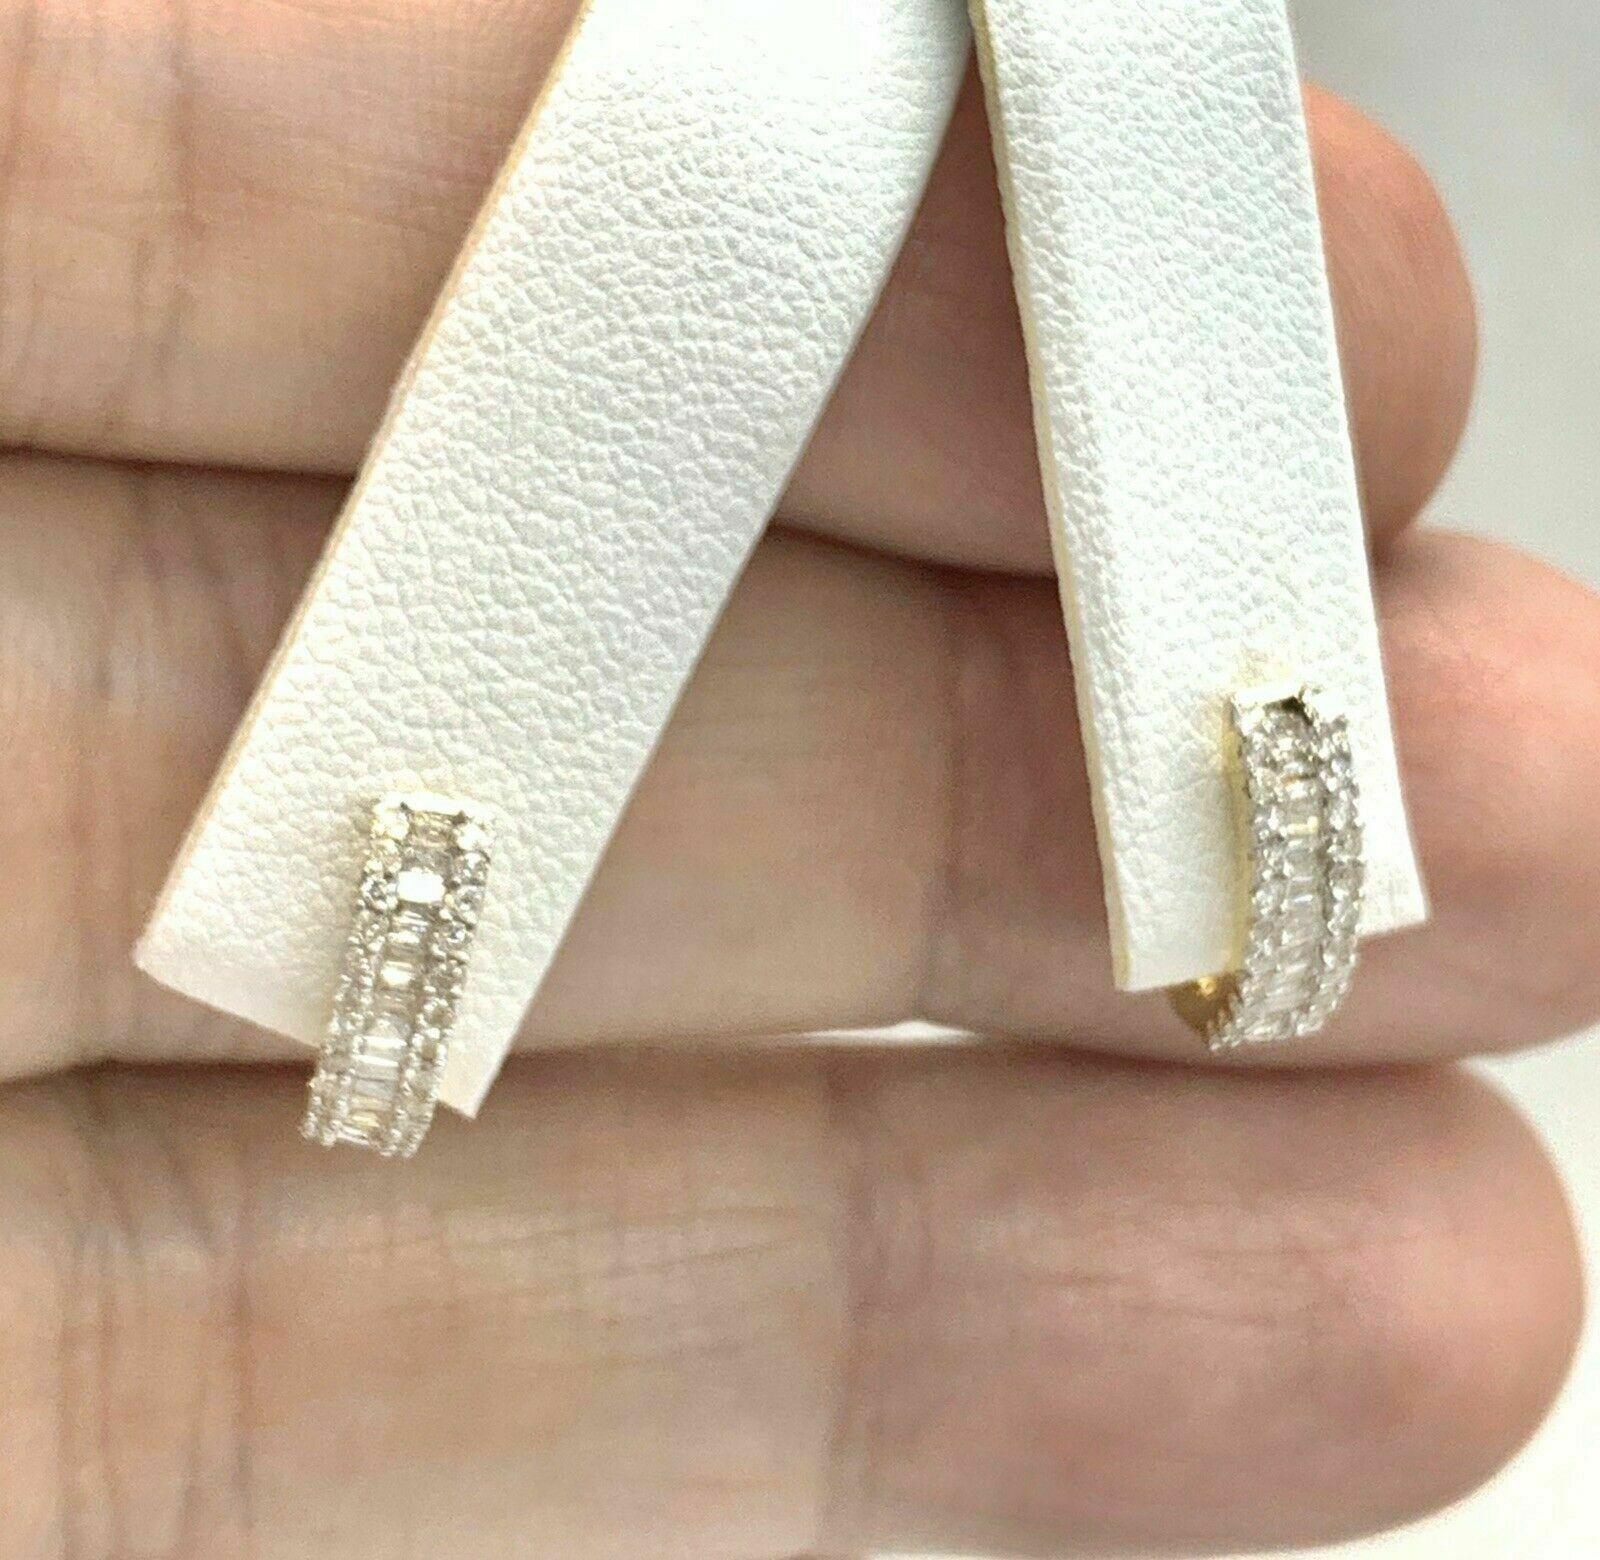 Certificate#201920214 YG

CERTIFIED $1390 FINE DIAMOND LADYS HUGGER 14 KT GOLD EARRINGS

This is a One of a Kind Unique Custom Made Glamorous Piece of Jewelry!!
Nothing says, “I Love ❤️ you” more than Diamonds and Pearls‼️

This fine piece of